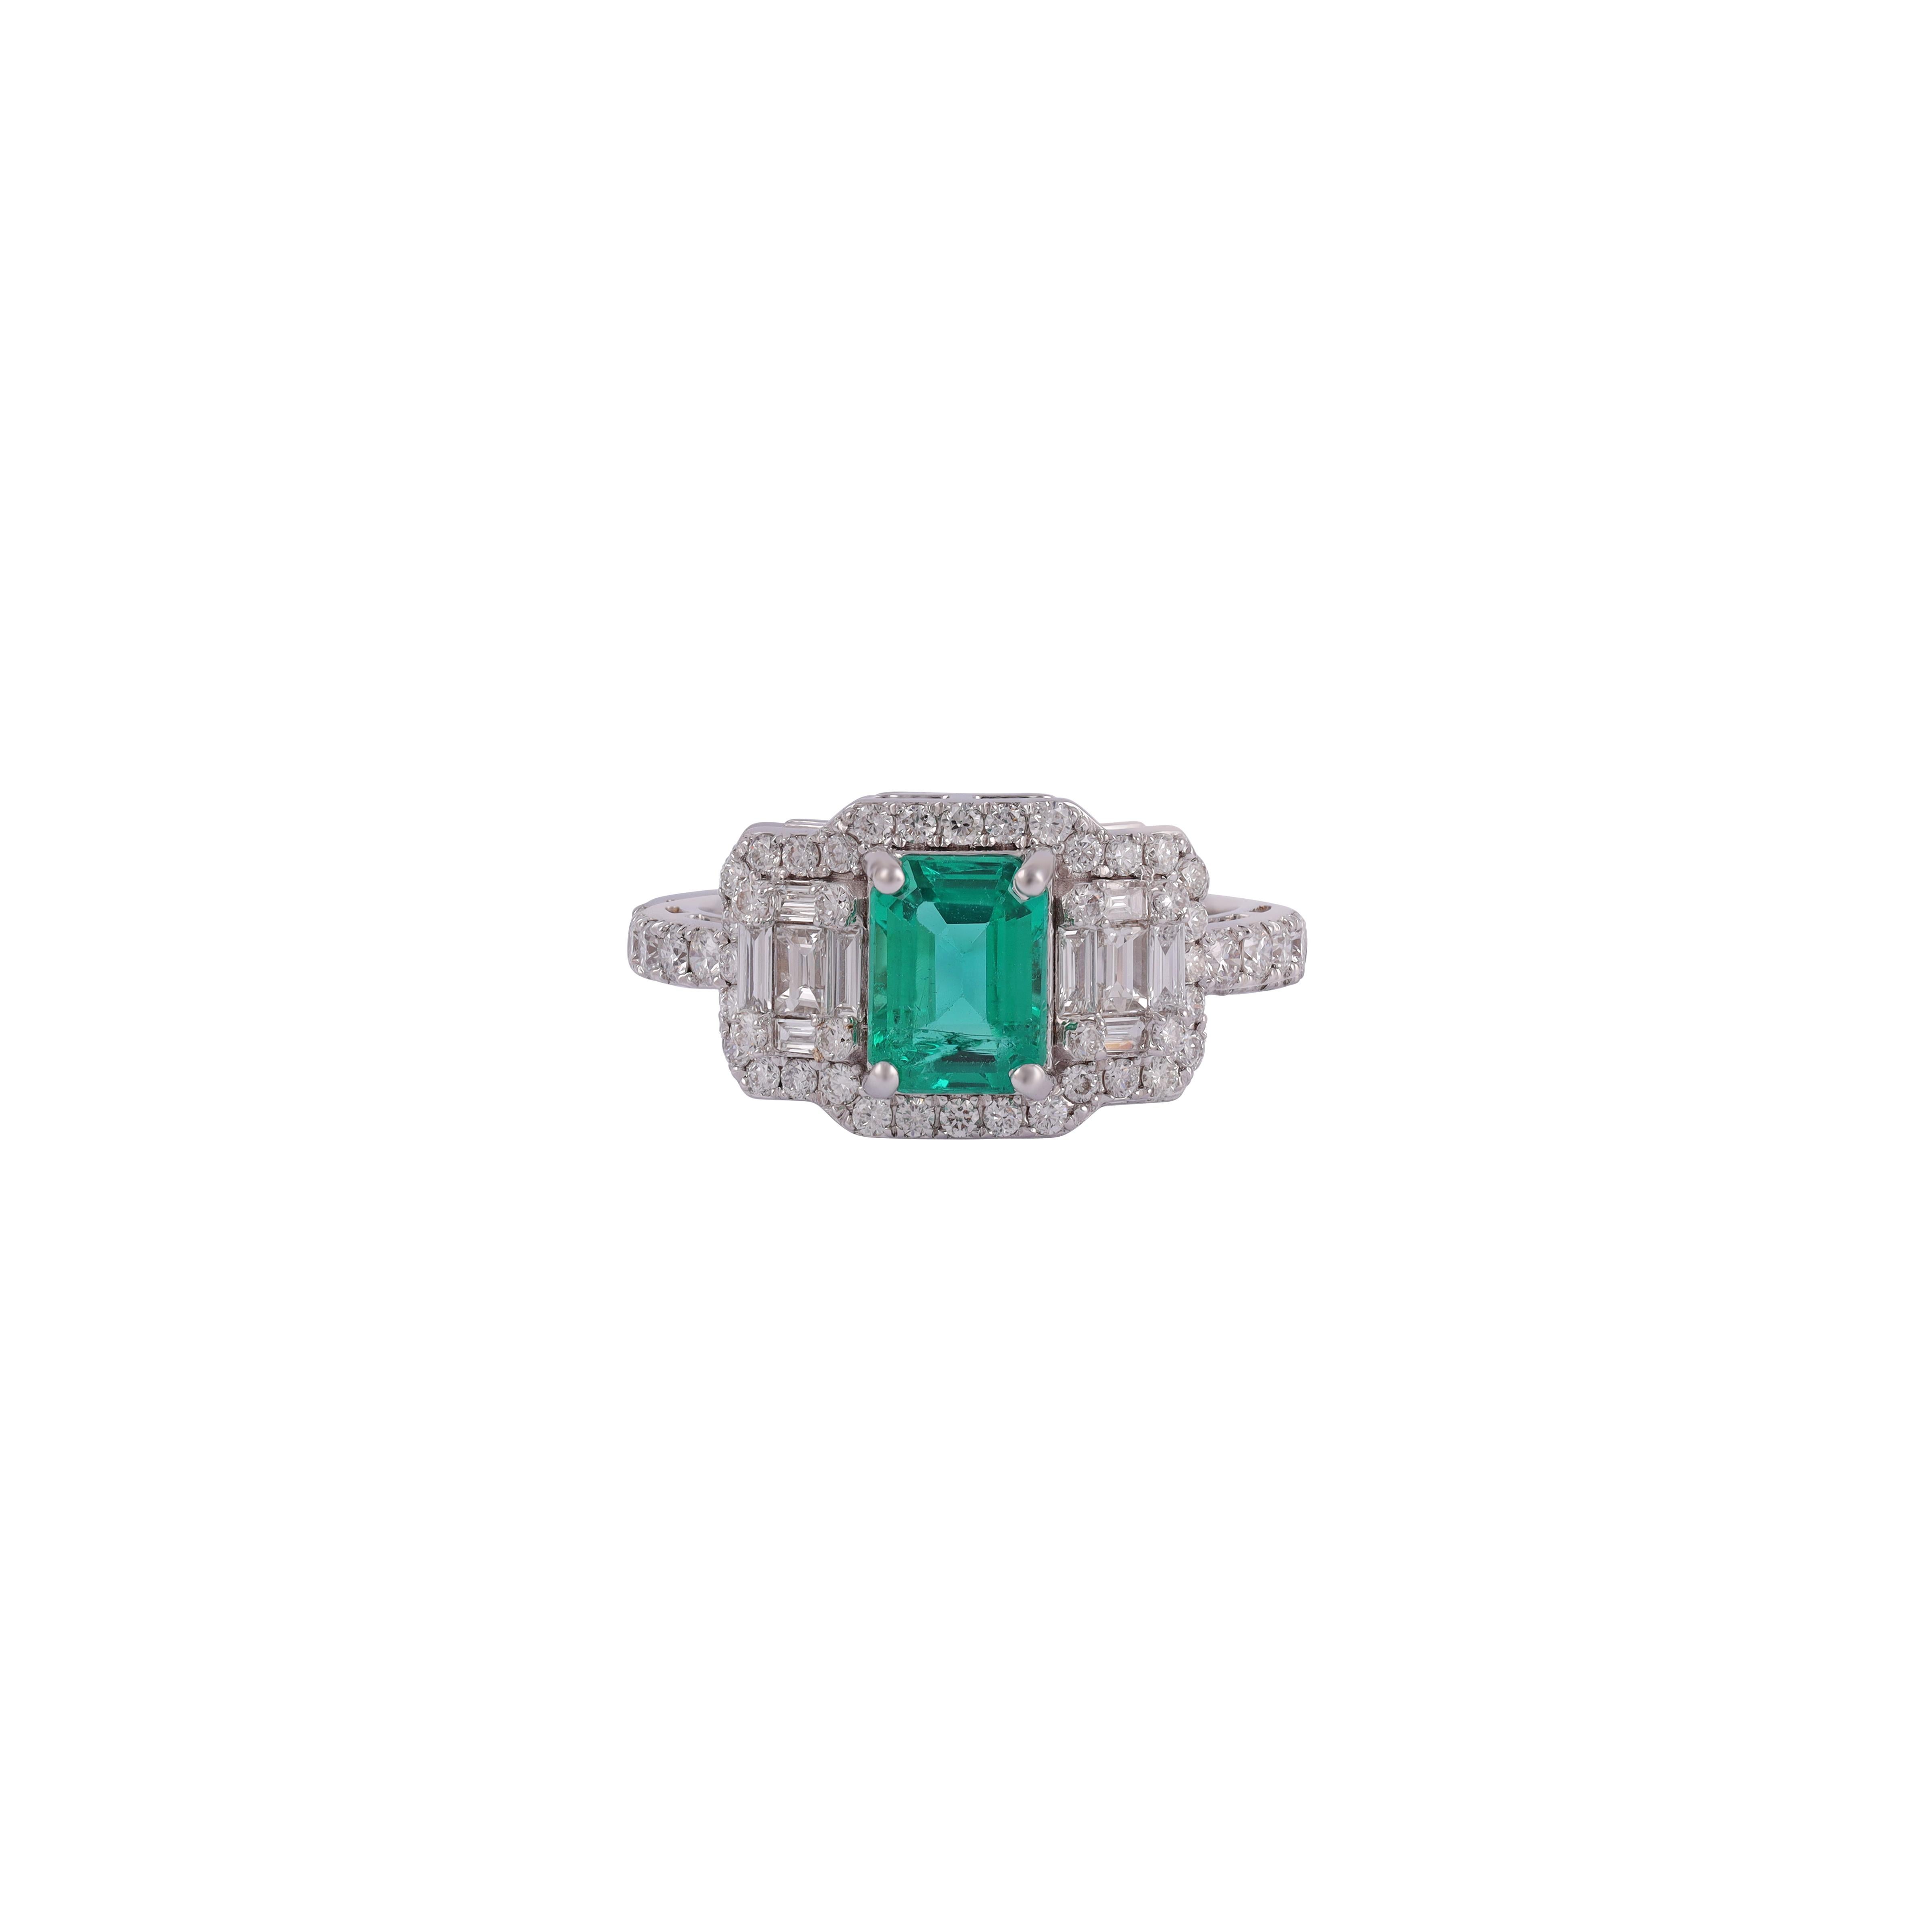 Stunning 1.24 Carat Fine Colombian Emerald Diamond Engagement Estate Engagement Wedding Ring
The Emerald ring is composed by a 1.24 carat clear Colombian Emeralds in Emerald cut at the center surround by (0.24 carat) baguette diamonds & (0.51 carat)